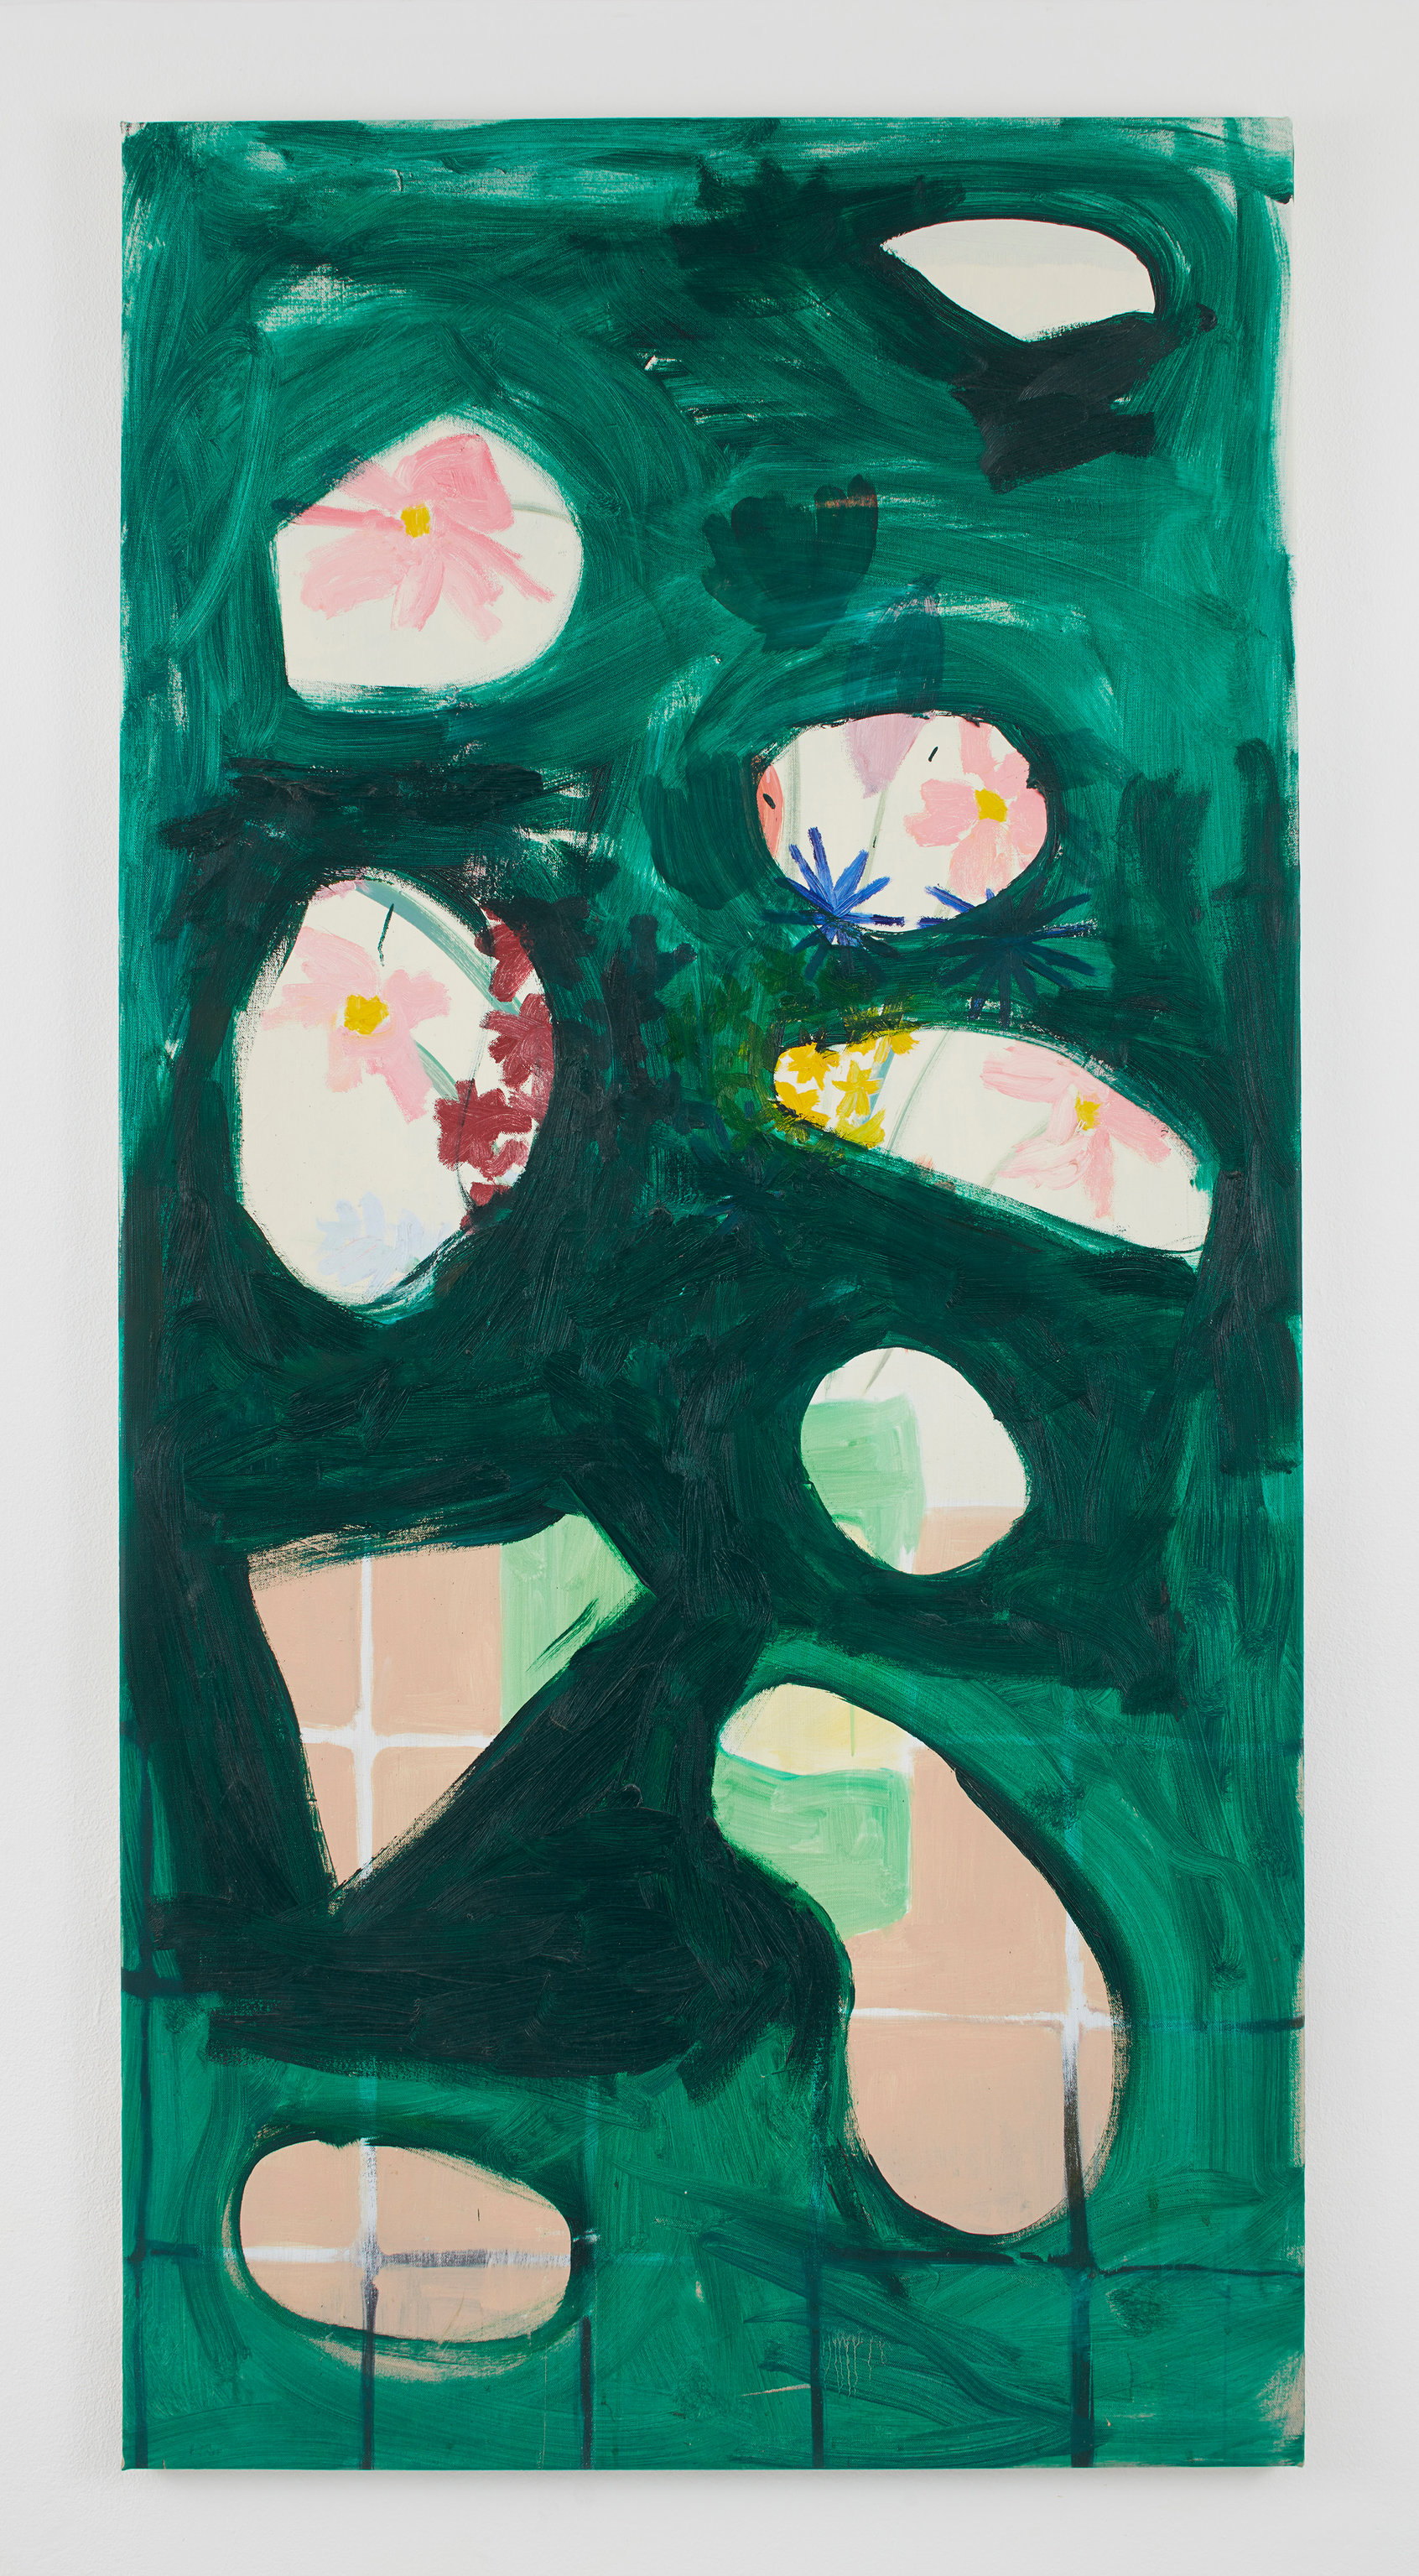 Grace Anderson, Blossoming bite marks, 2014